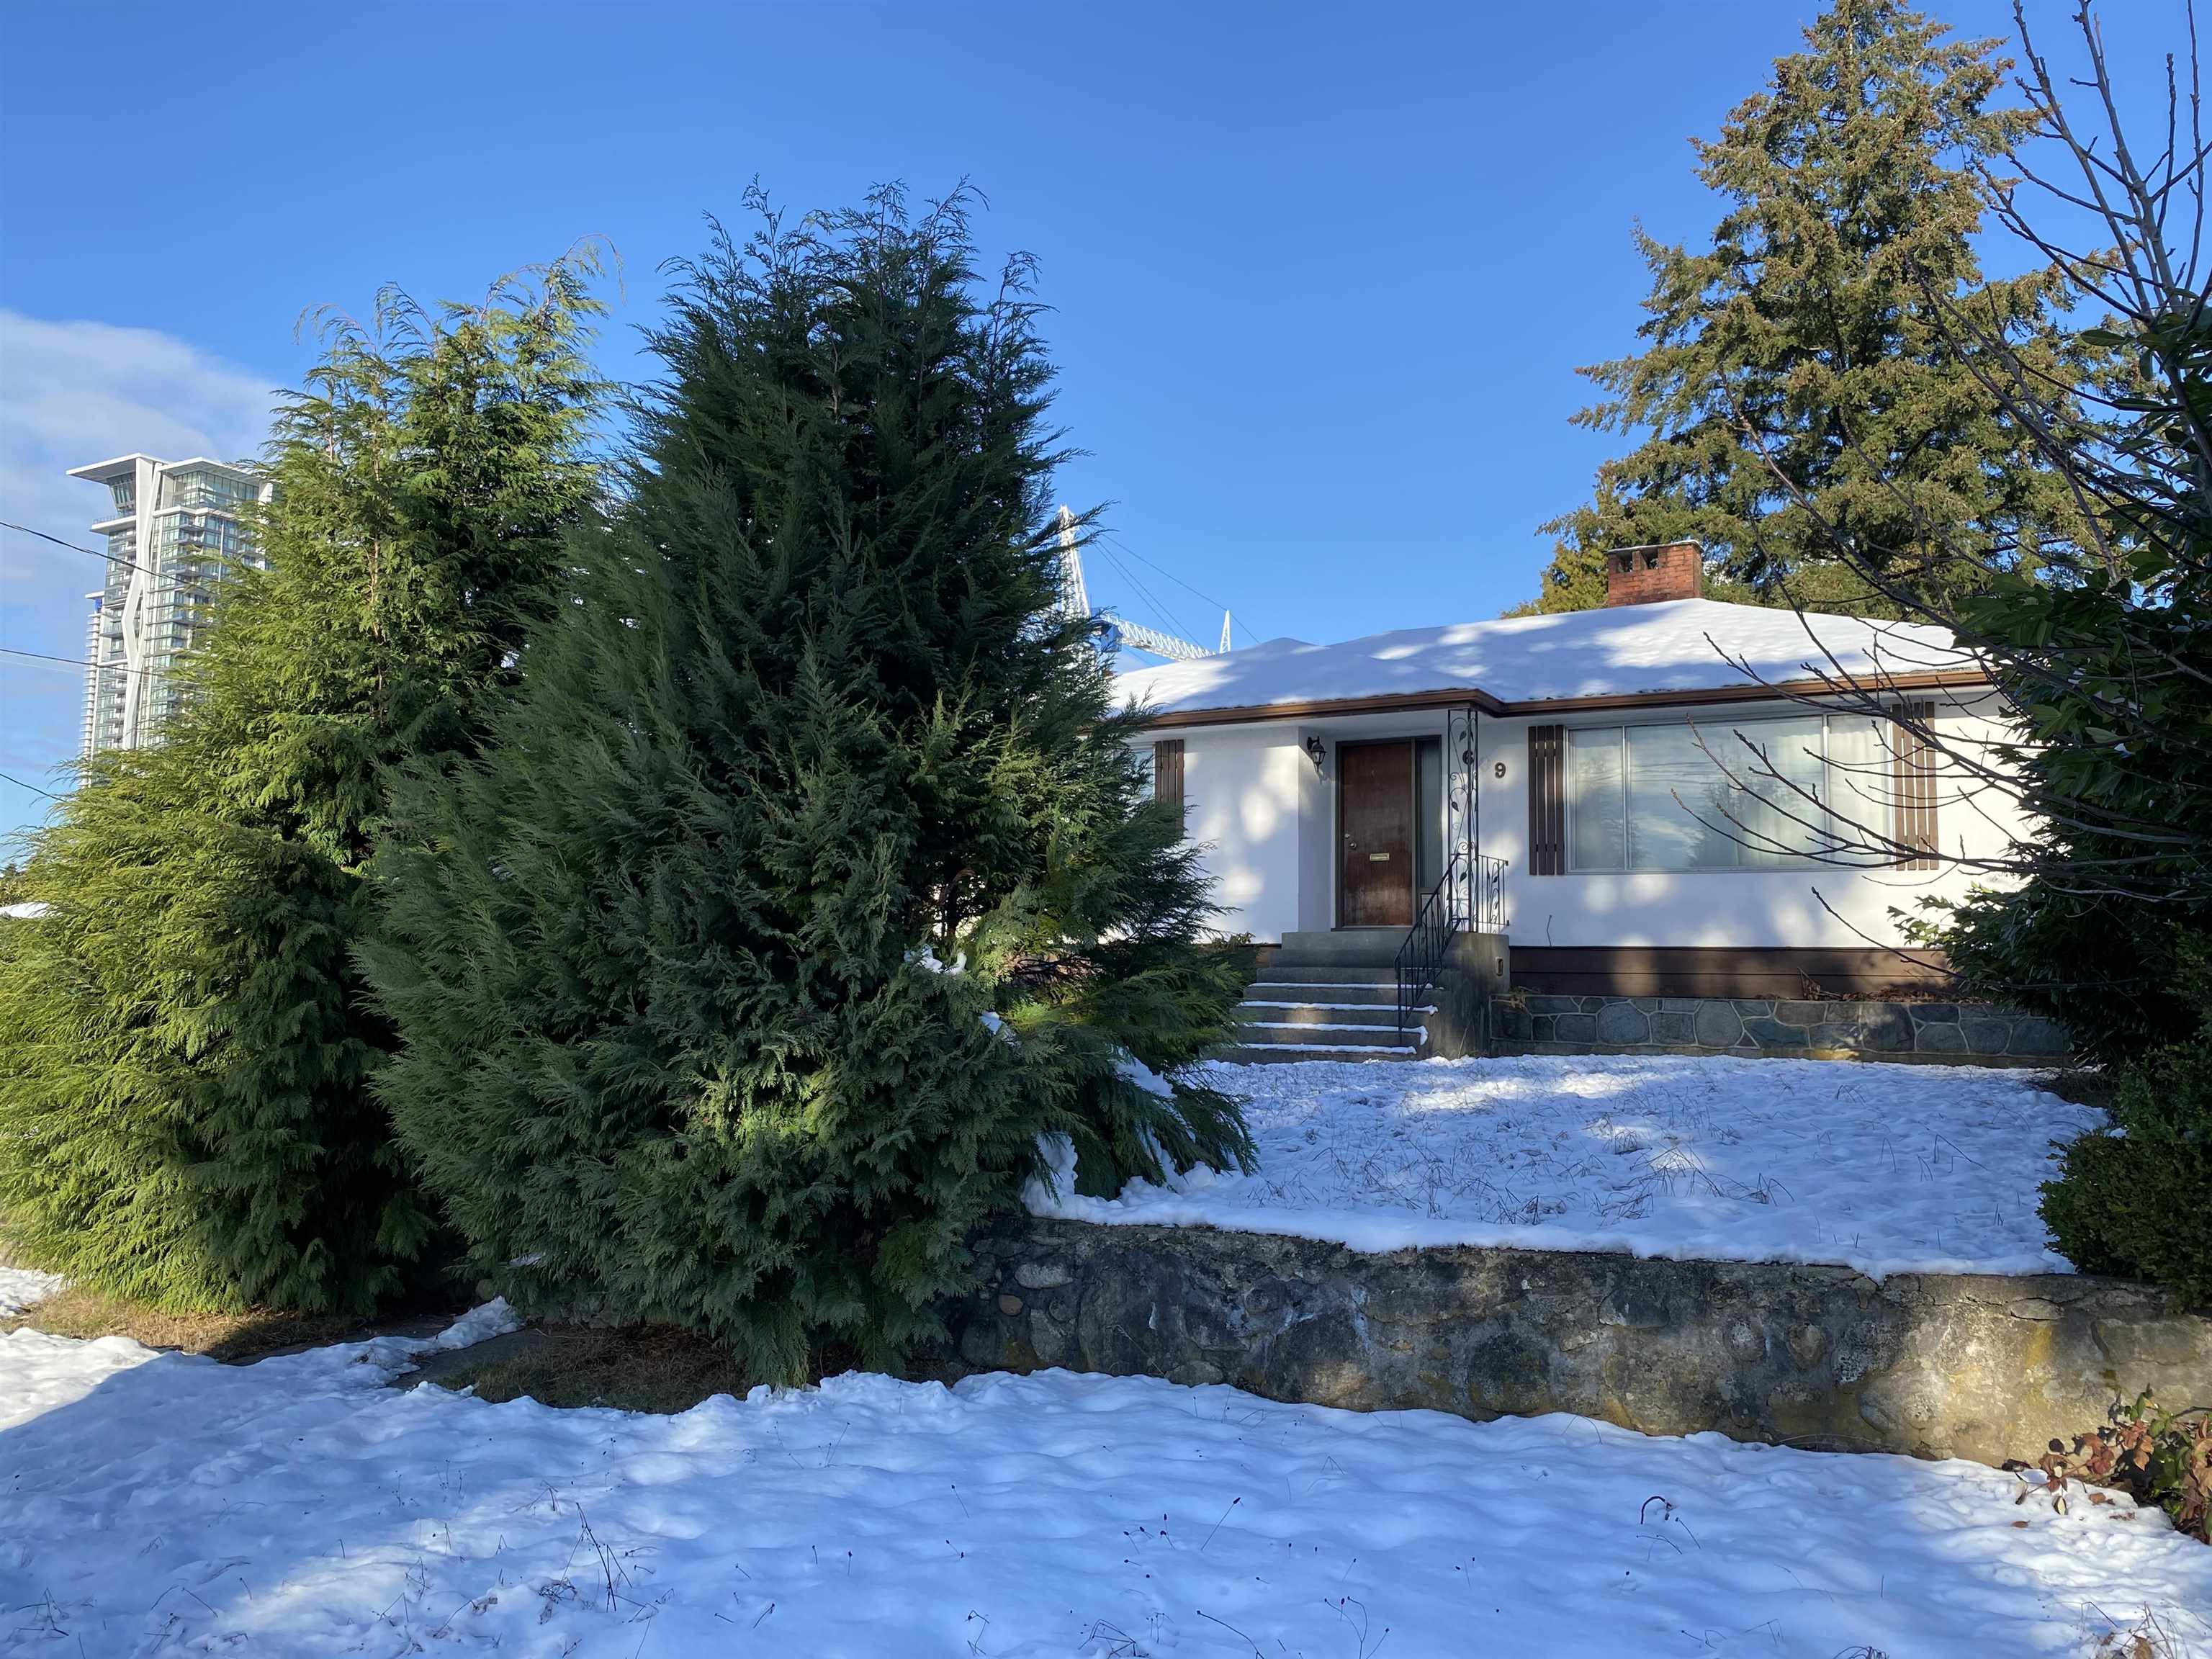 Listing image of 609 MADORE AVENUE